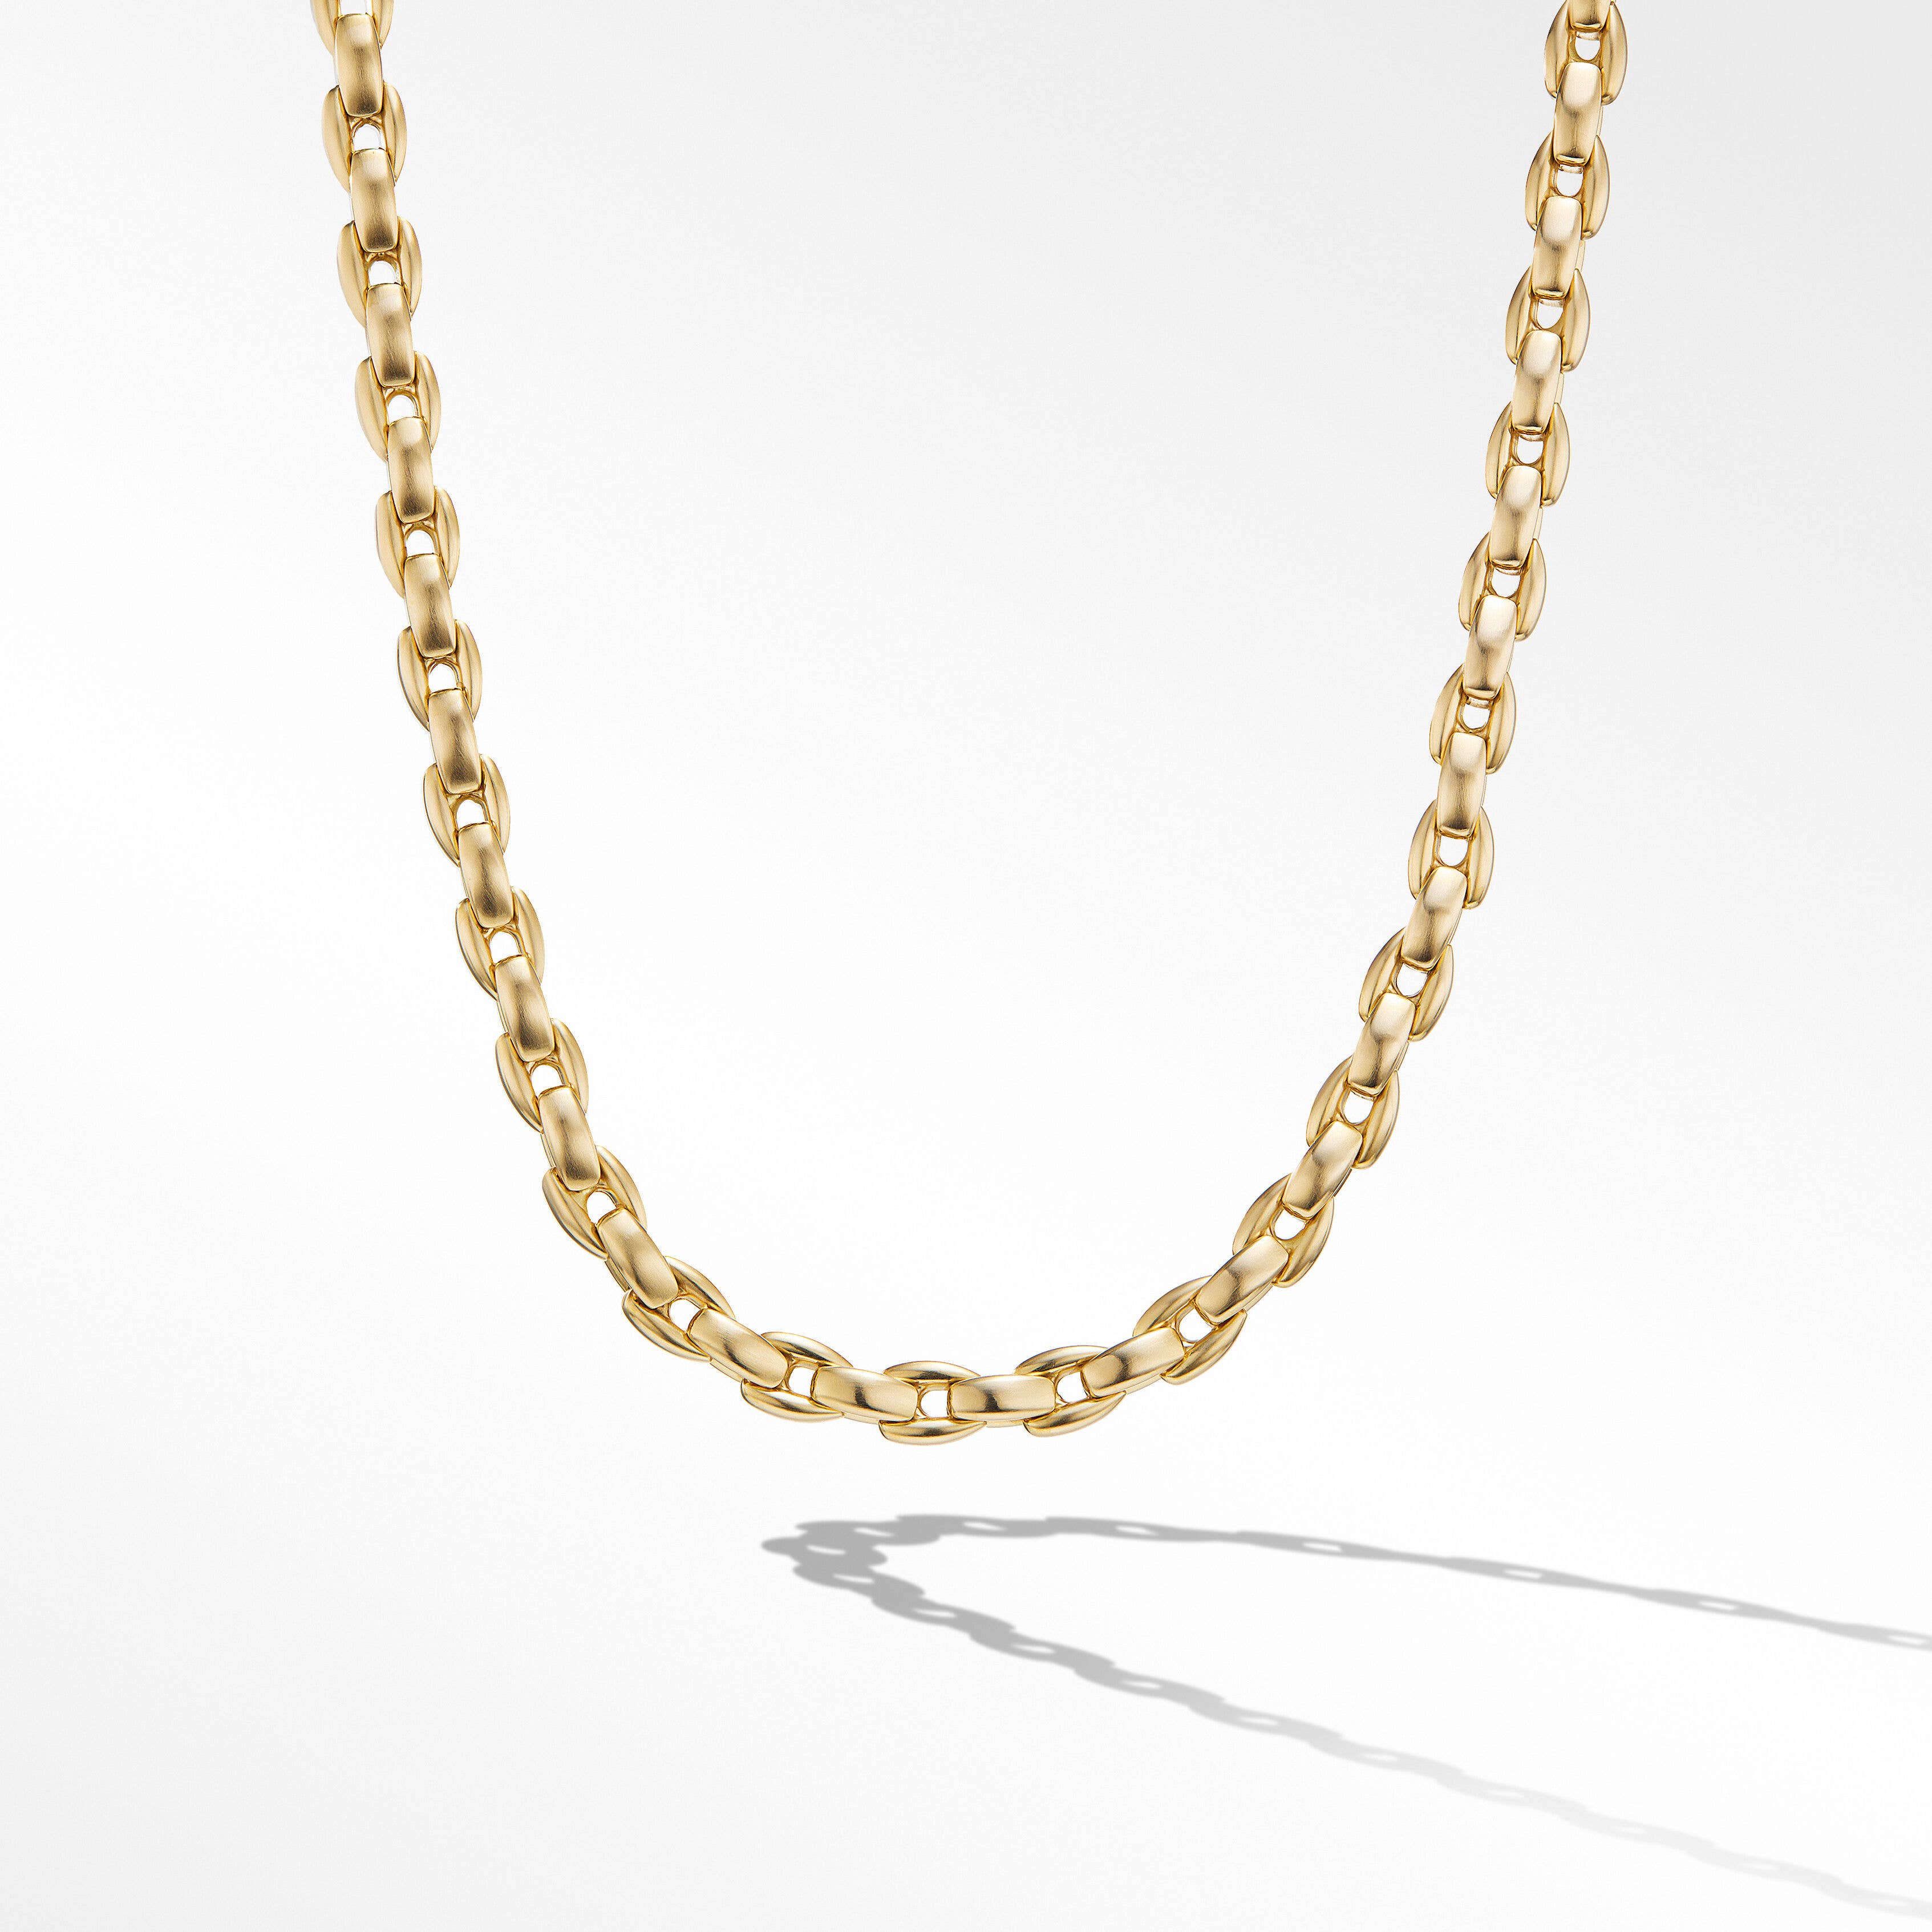 Elongated Box Chain Necklace in 18K Yellow Gold, 6mm